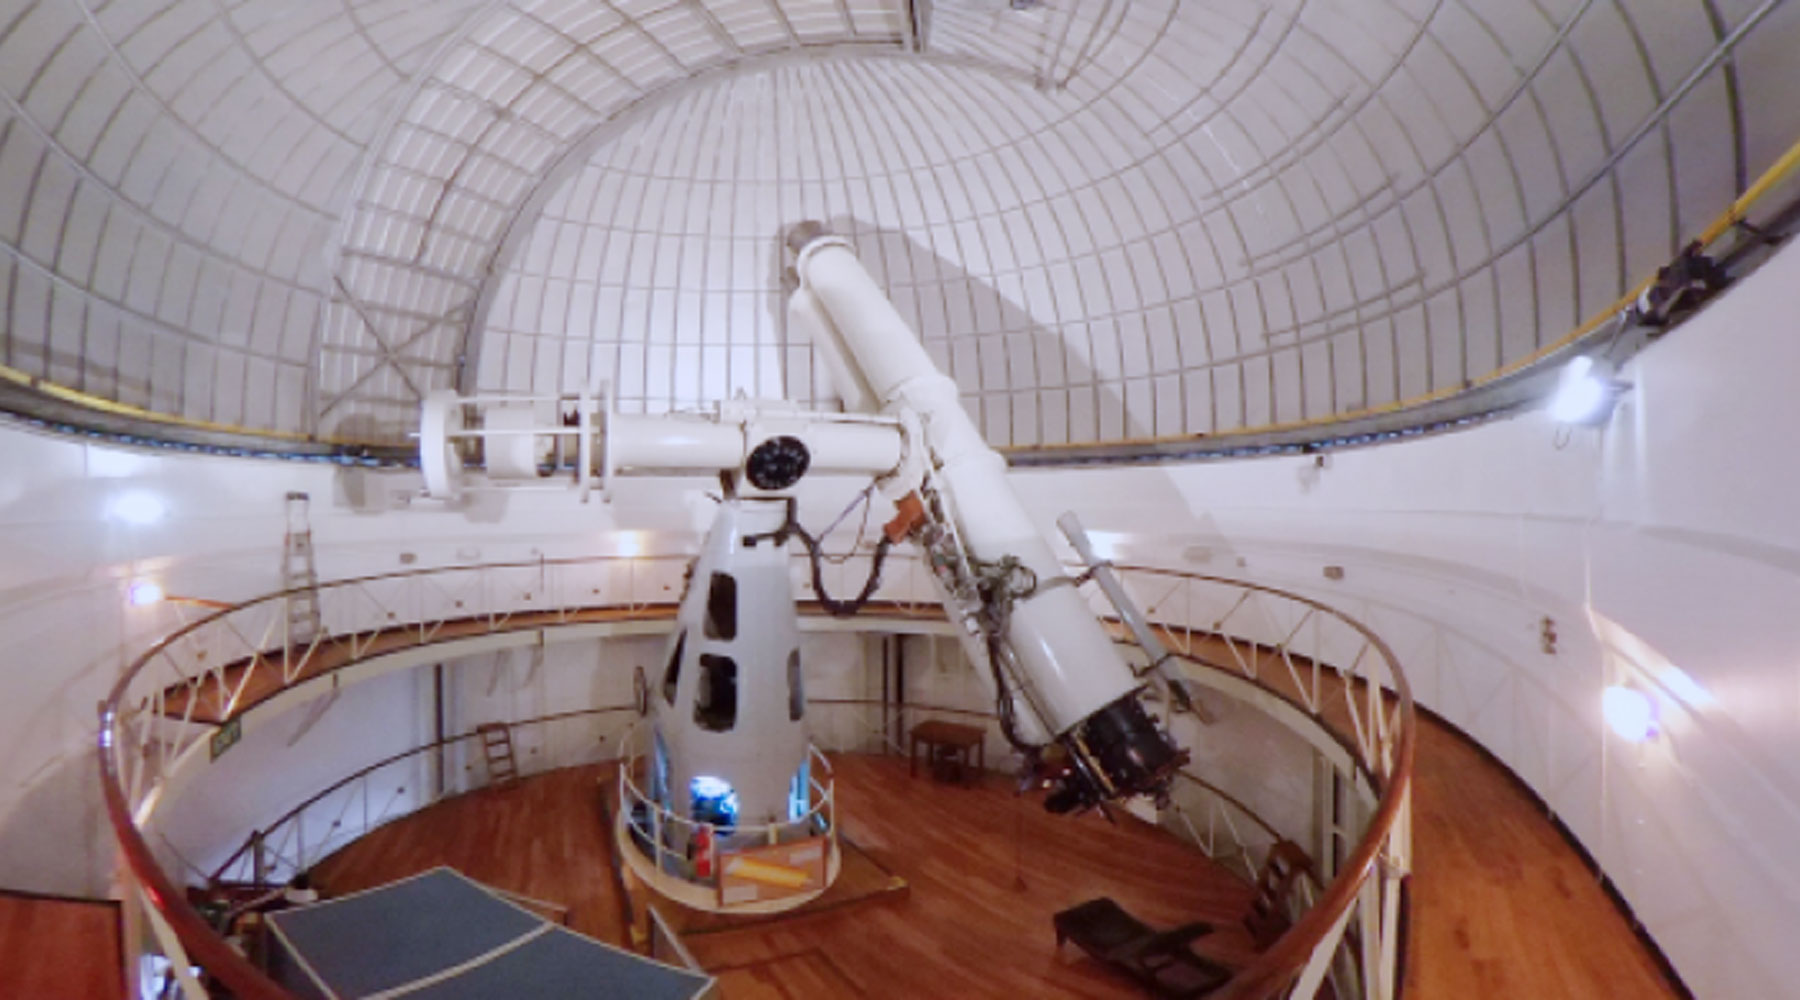 Tickets Alert: Public tours of UCL's telescope observatory